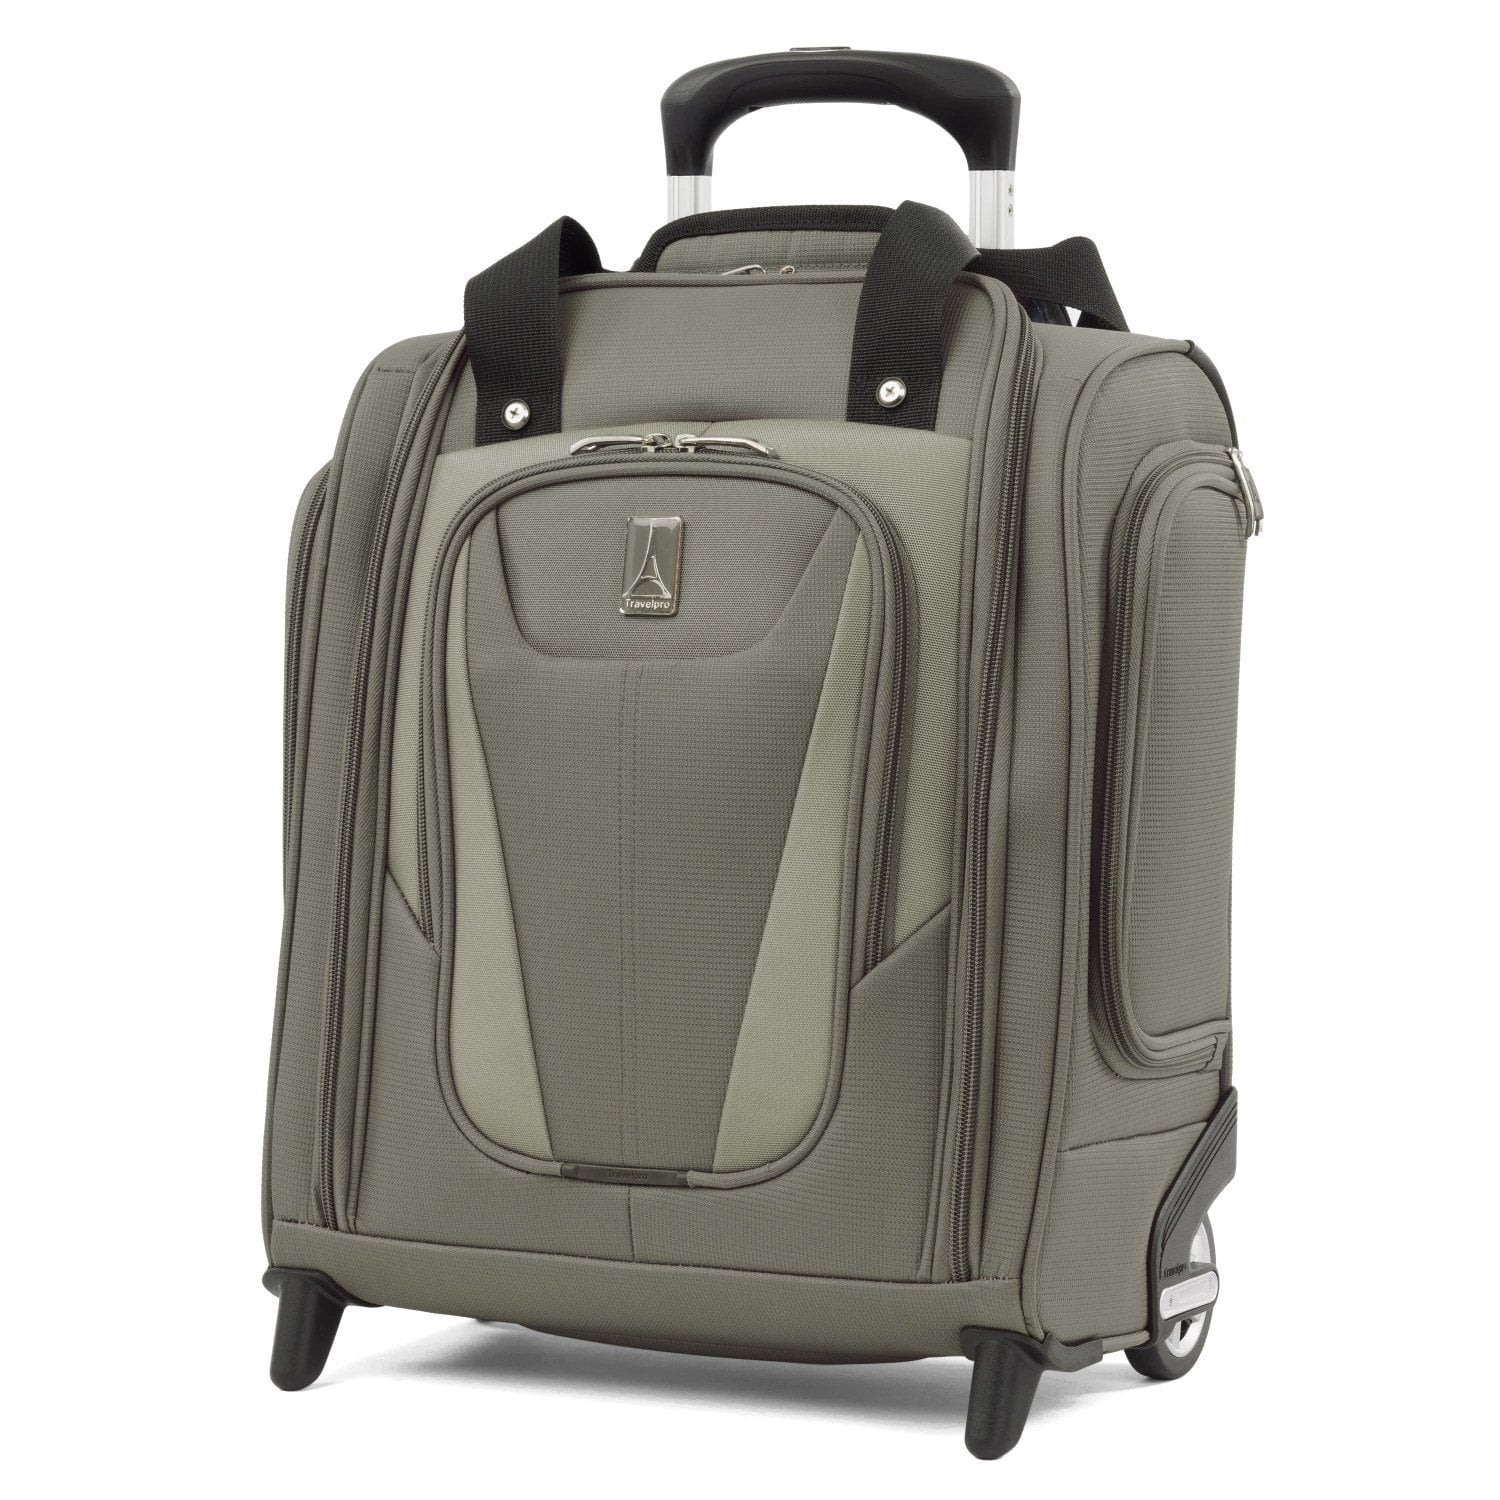 Travelpro Maxlite 5 Rolling Underseat Carry-On Luggage - Slate Green